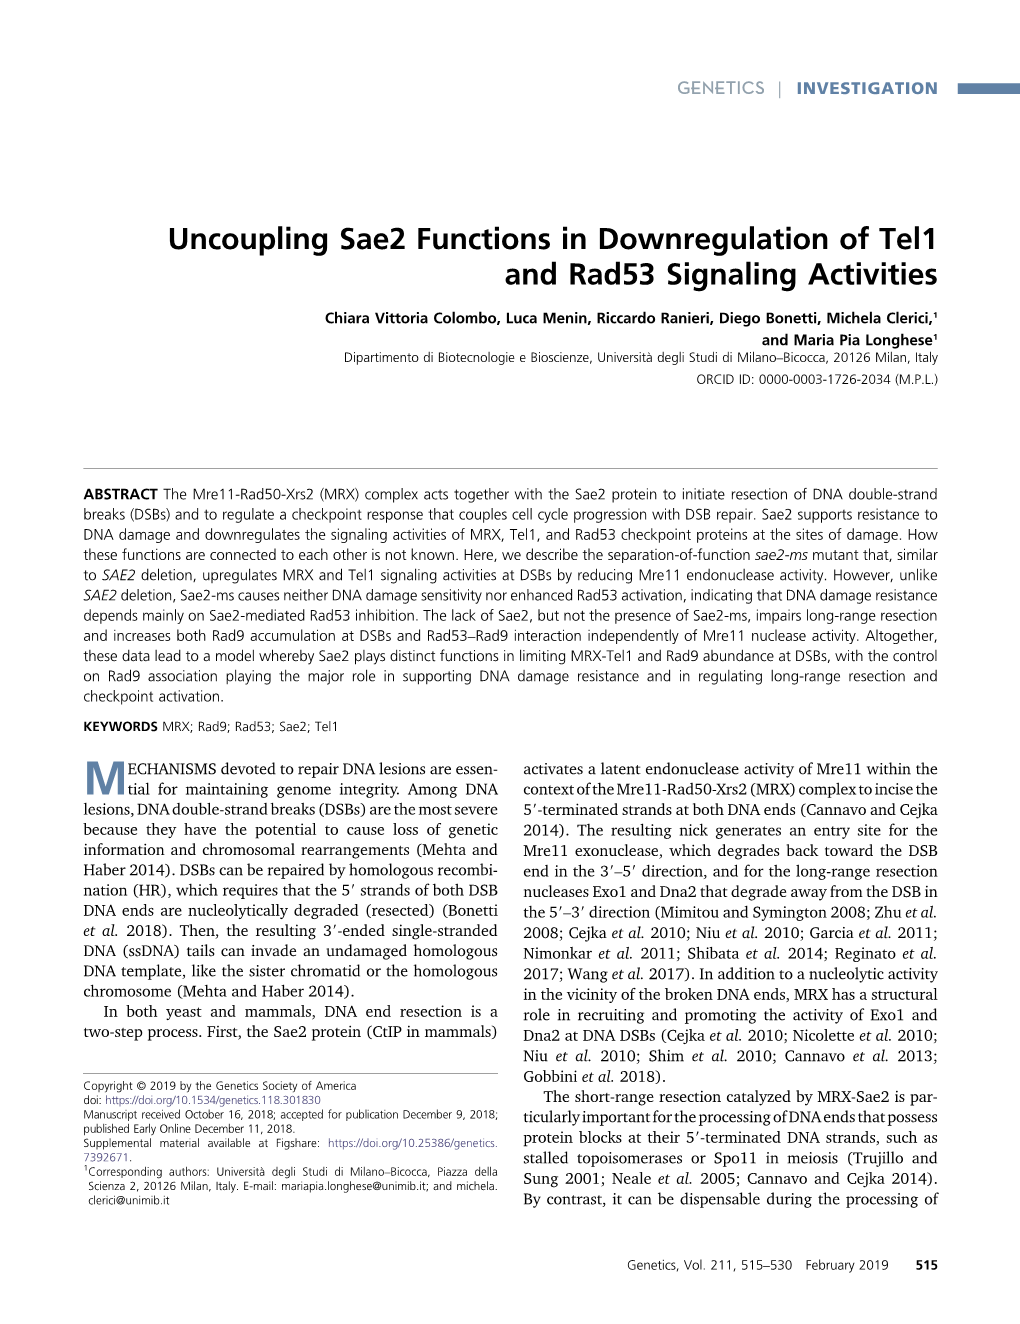 Uncoupling Sae2 Functions in Downregulation of Tel1 and Rad53 Signaling Activities